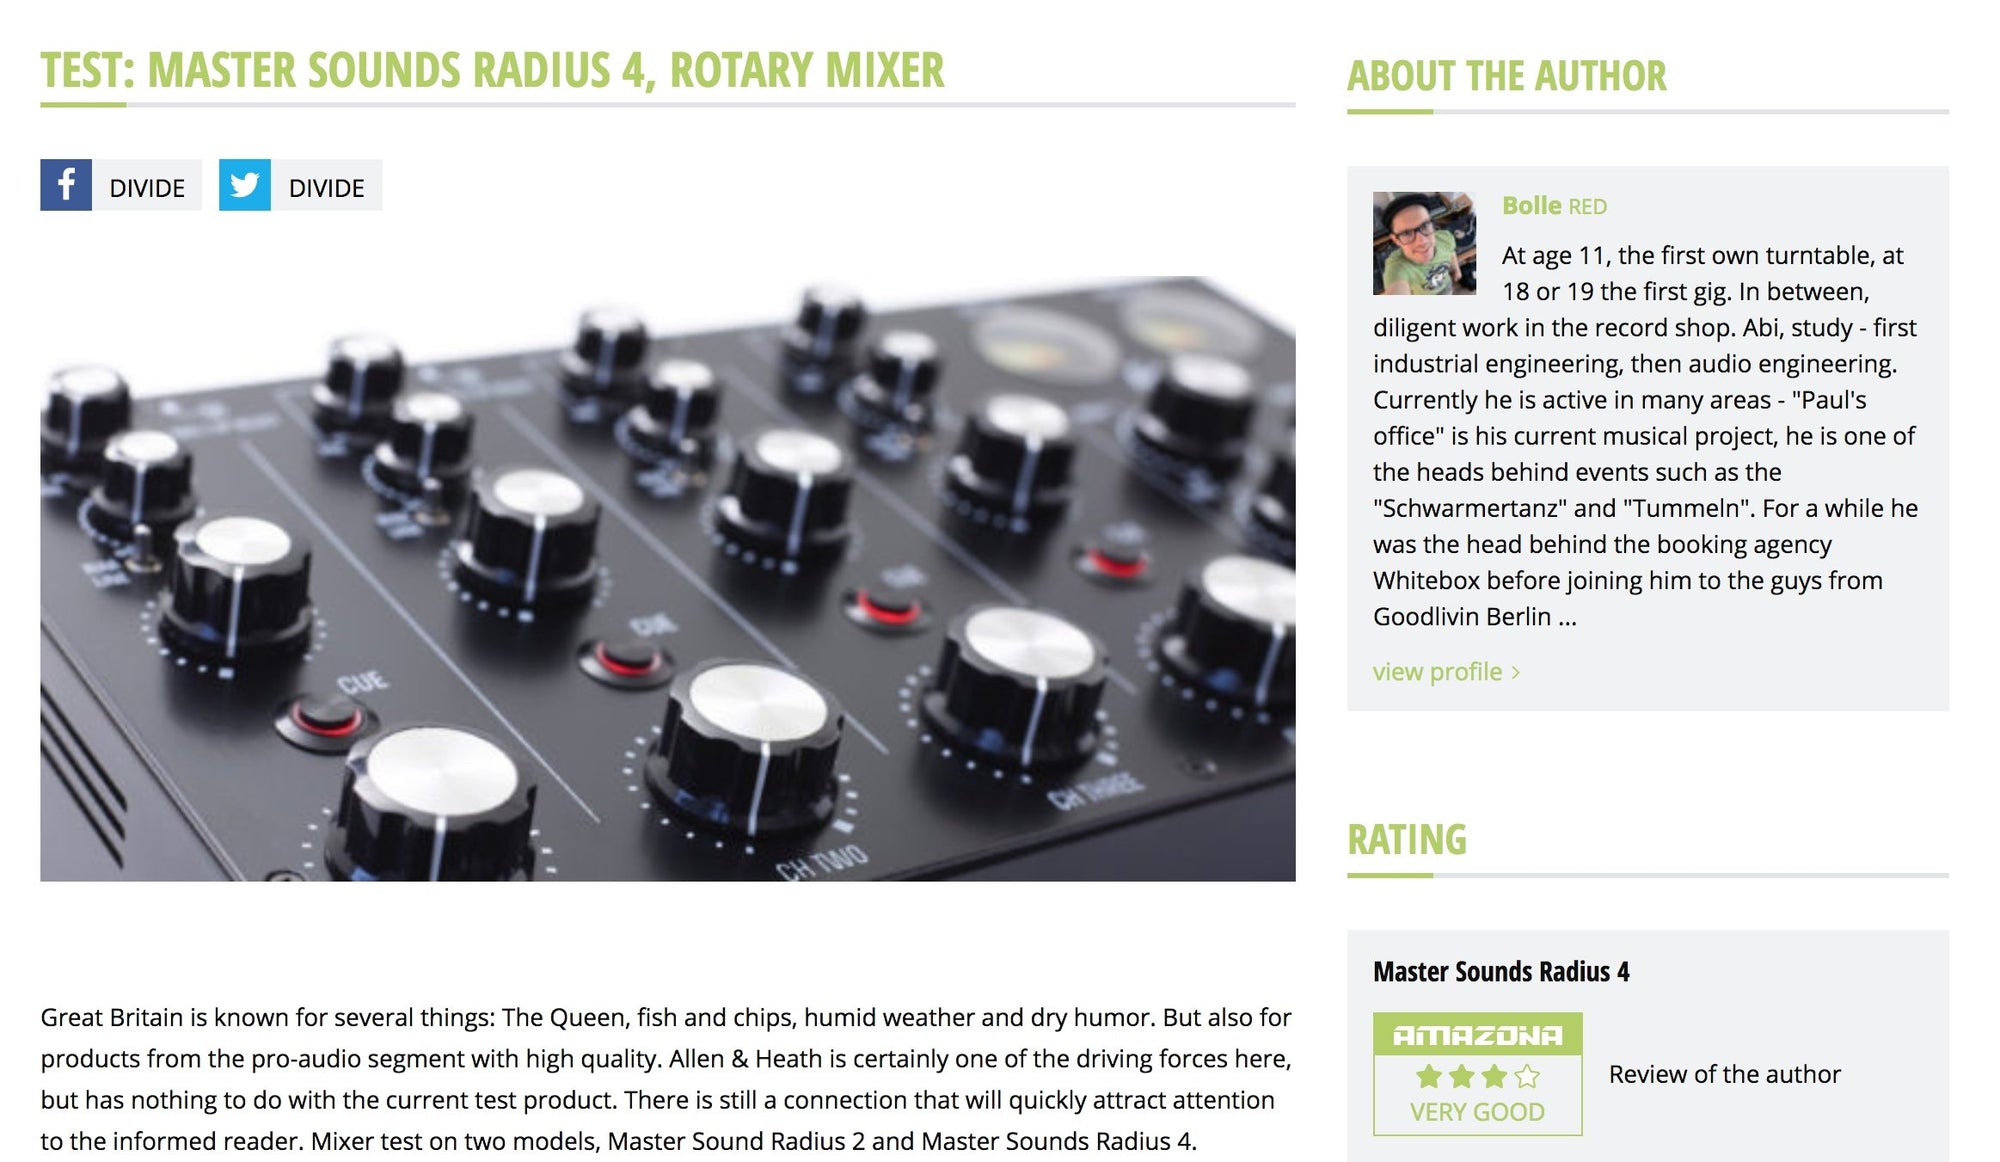 Amazonia.de review the Radius 4 in a wonderful fashion... - MasterSounds